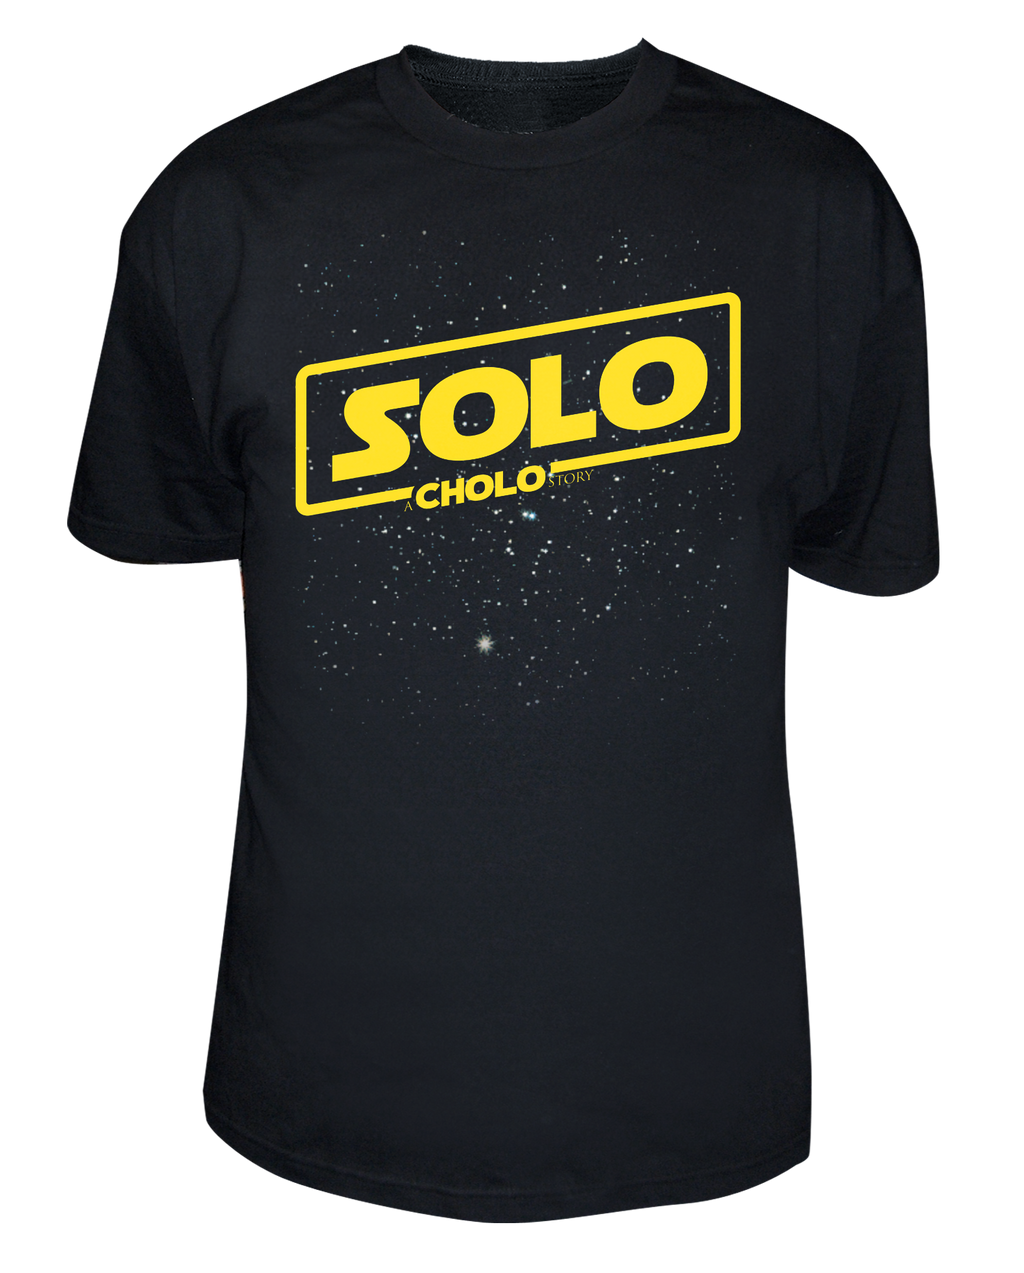 Solo Story Tee